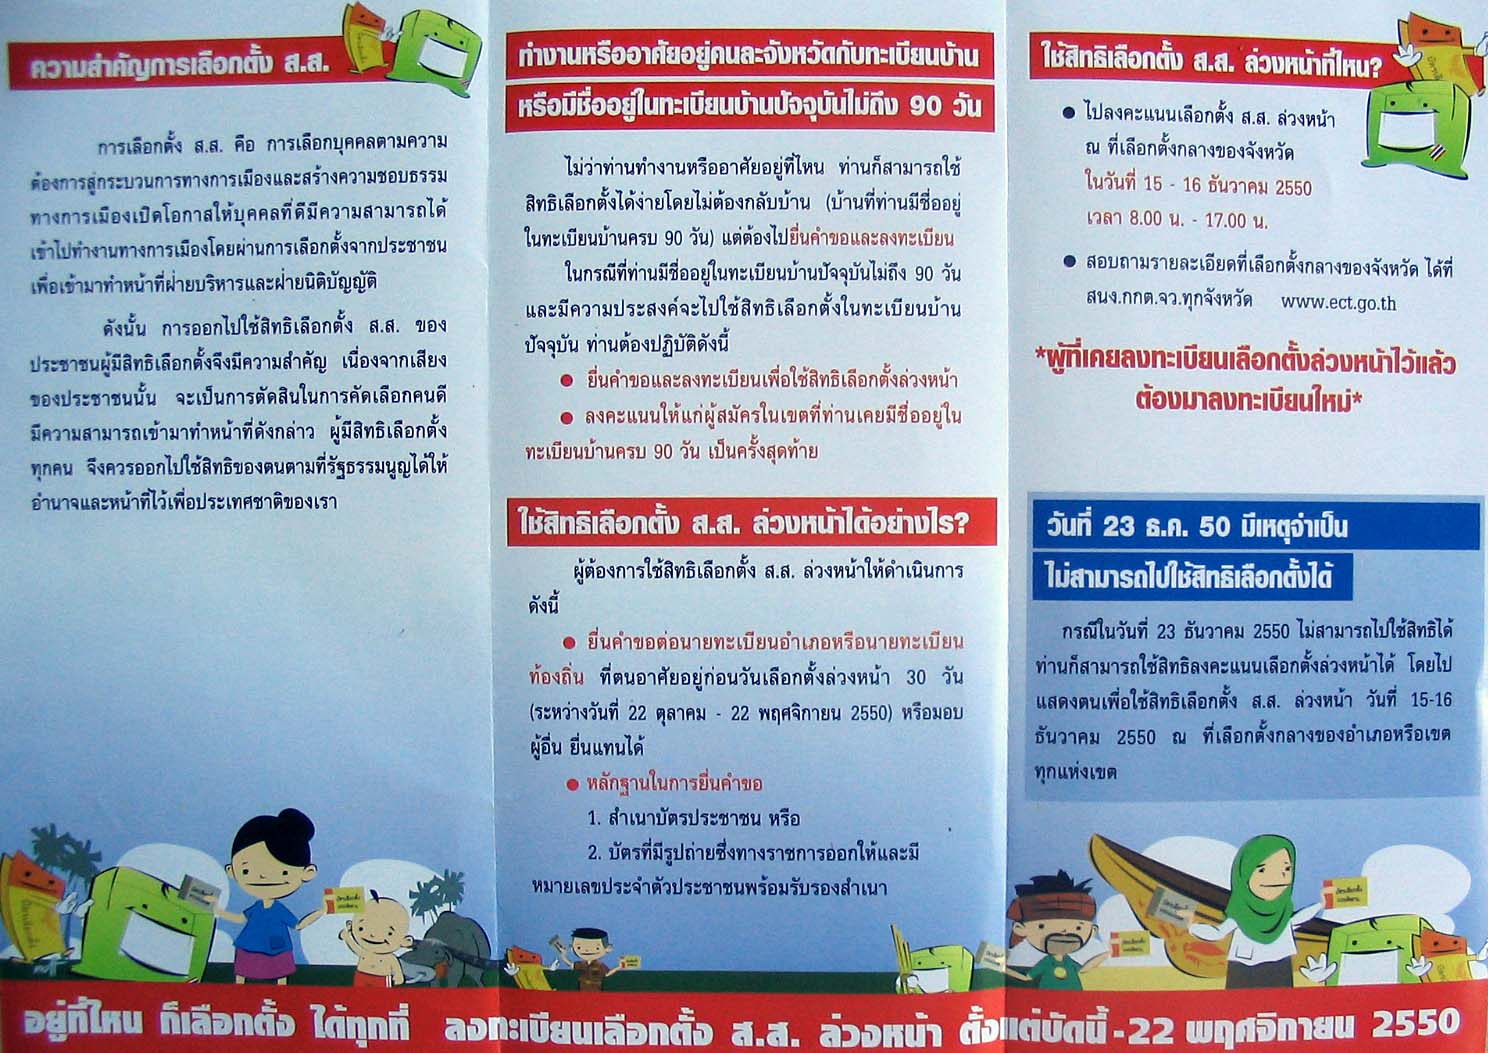 Chachoengsao election leaflet, 2007 election, Thailand